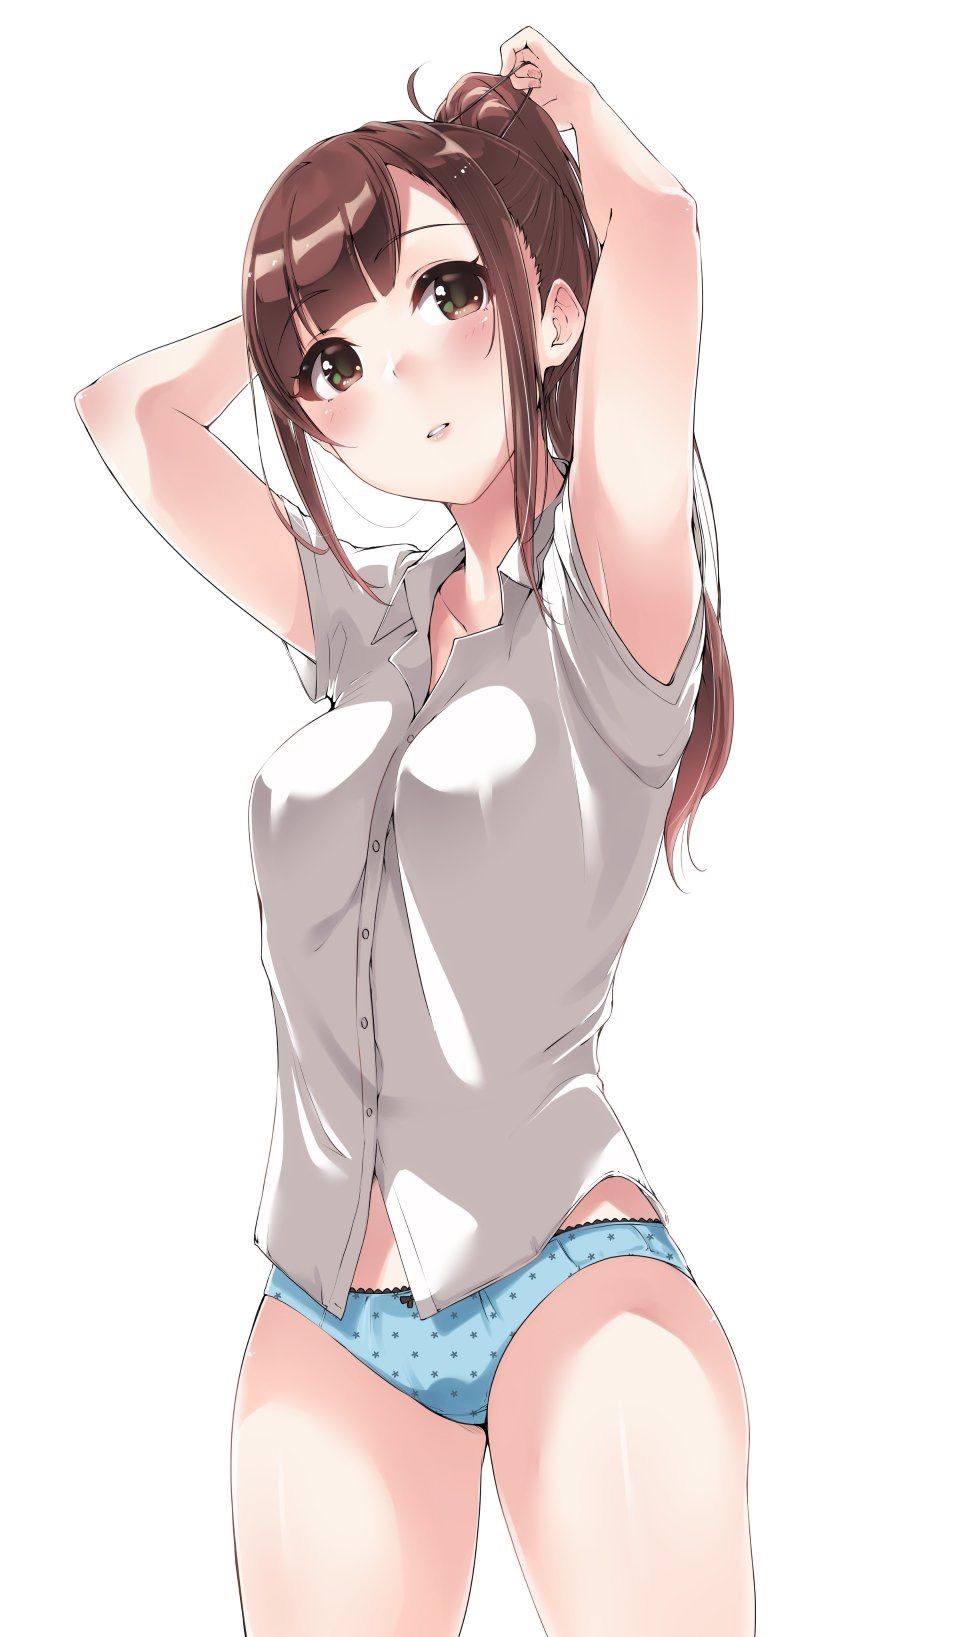 Erotic image that you can see the naughty charm of the armpit fetish 18